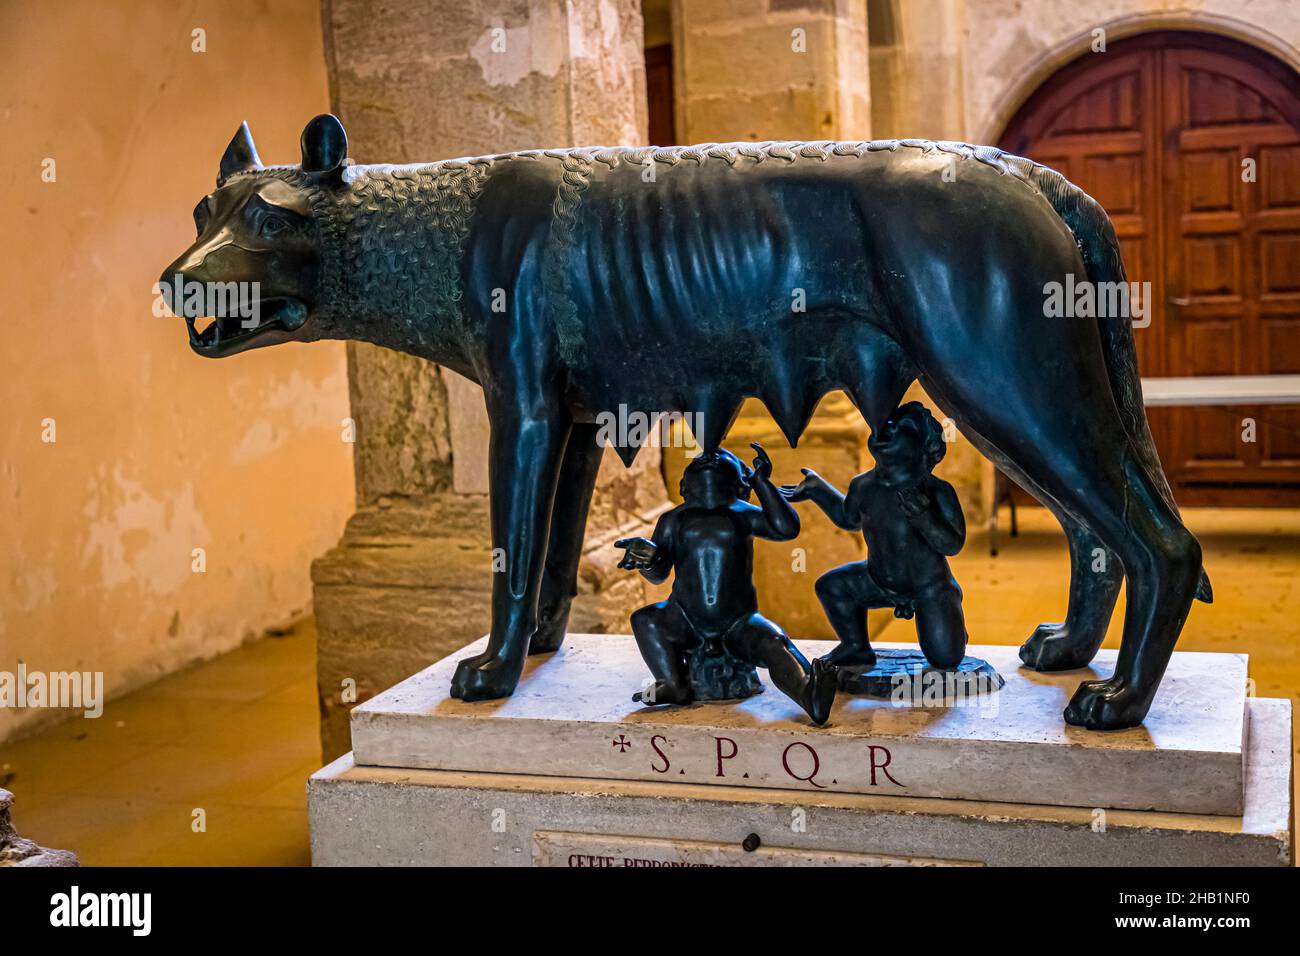 Replica of the sculpture S.P.Q.R. showing how a she-wolf suckles Romulus and Remus in Narbonne, France Stock Photo